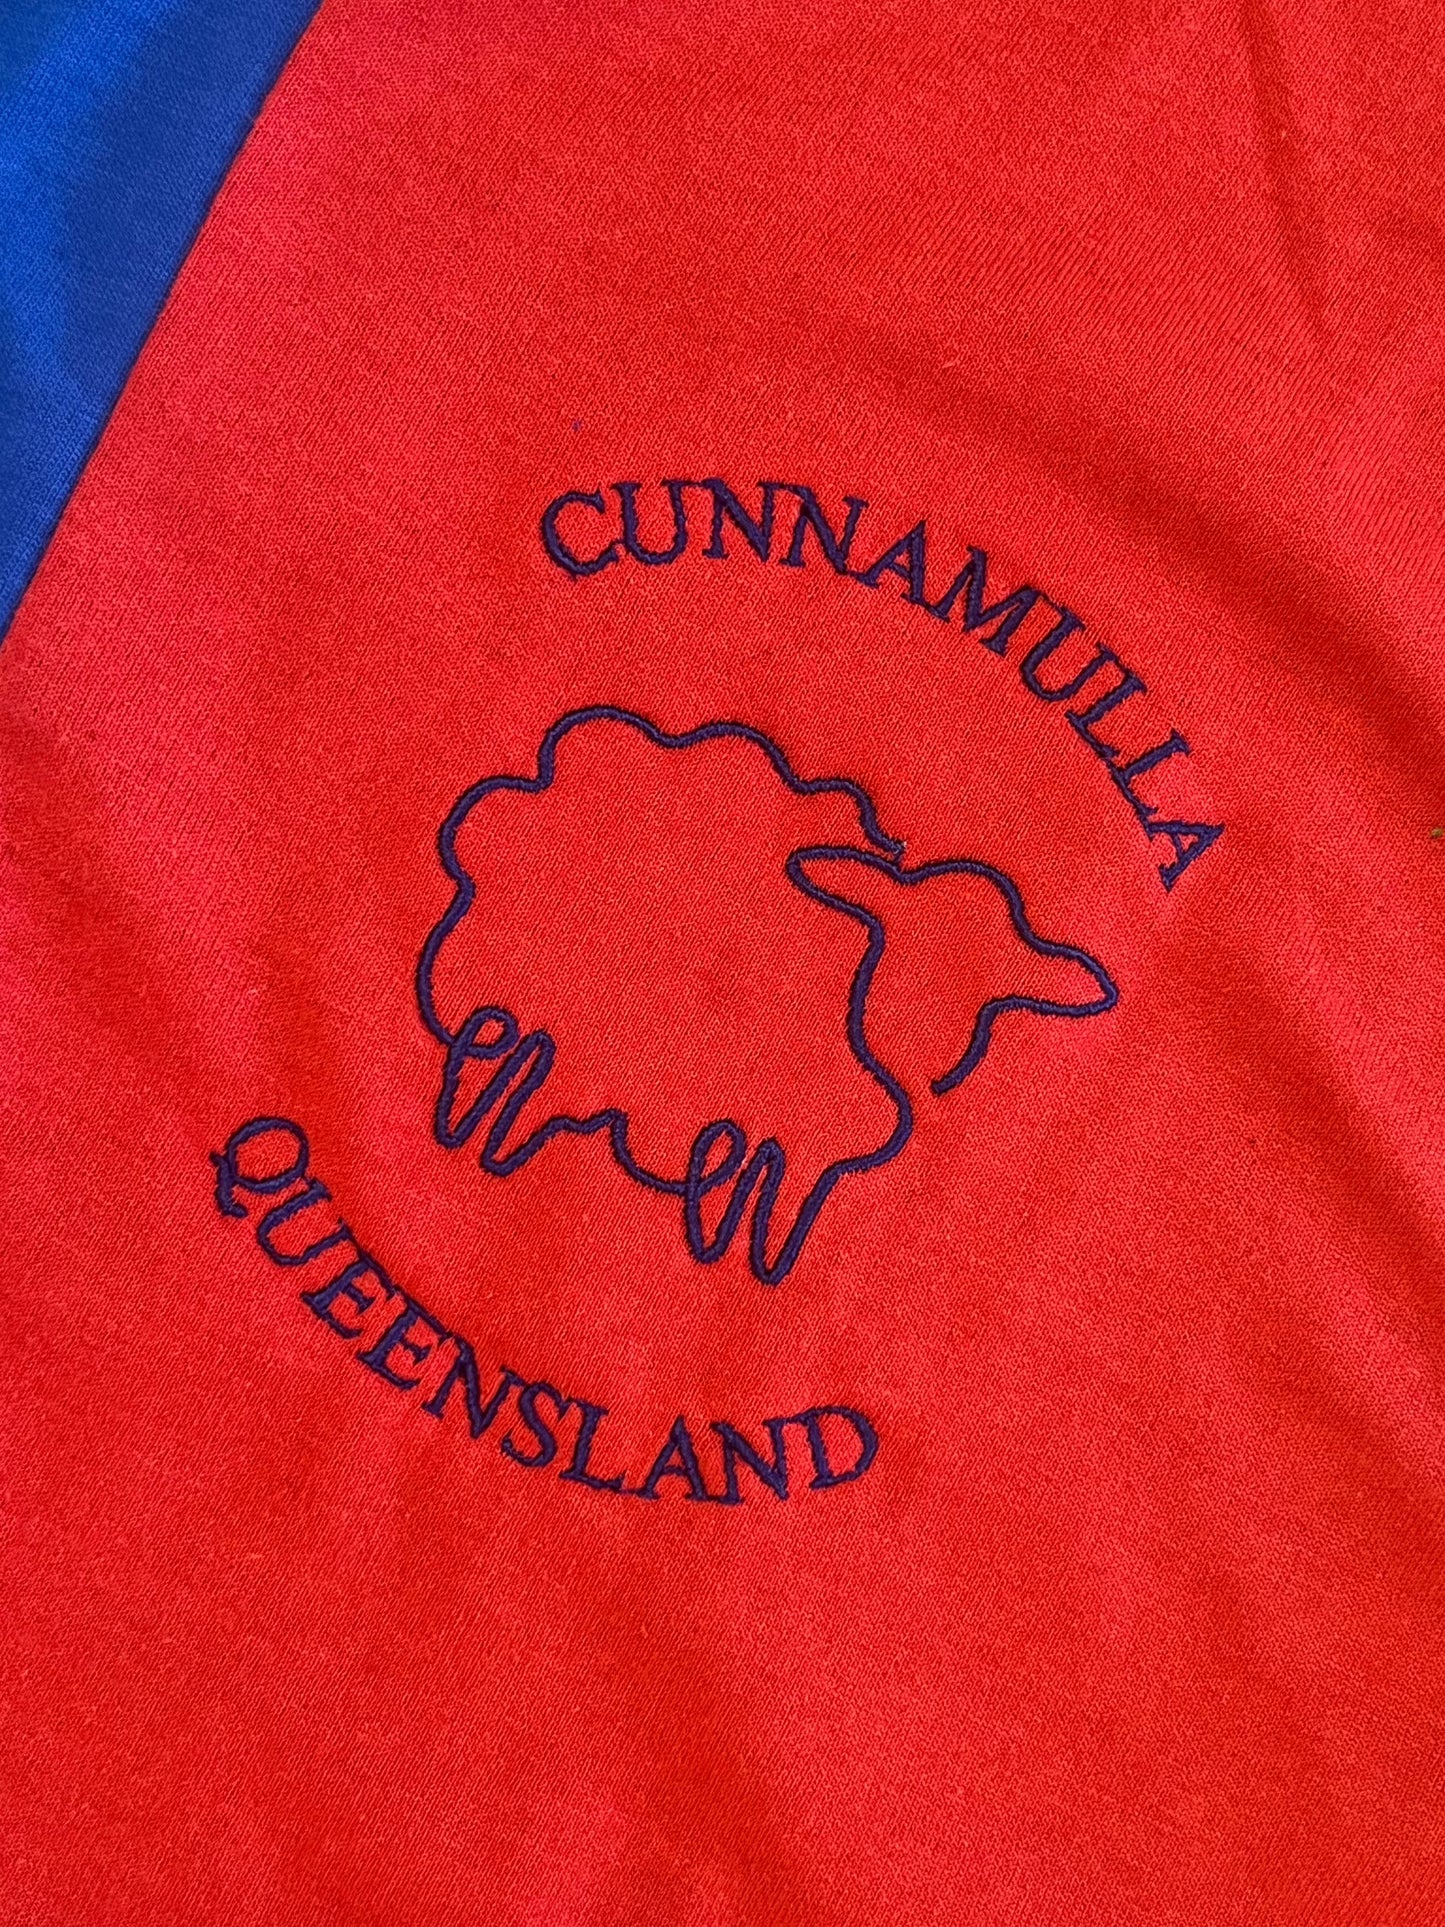 Shearing Singlet  - Cunnamulla Embroidery - Mens Red, Blue & Navy